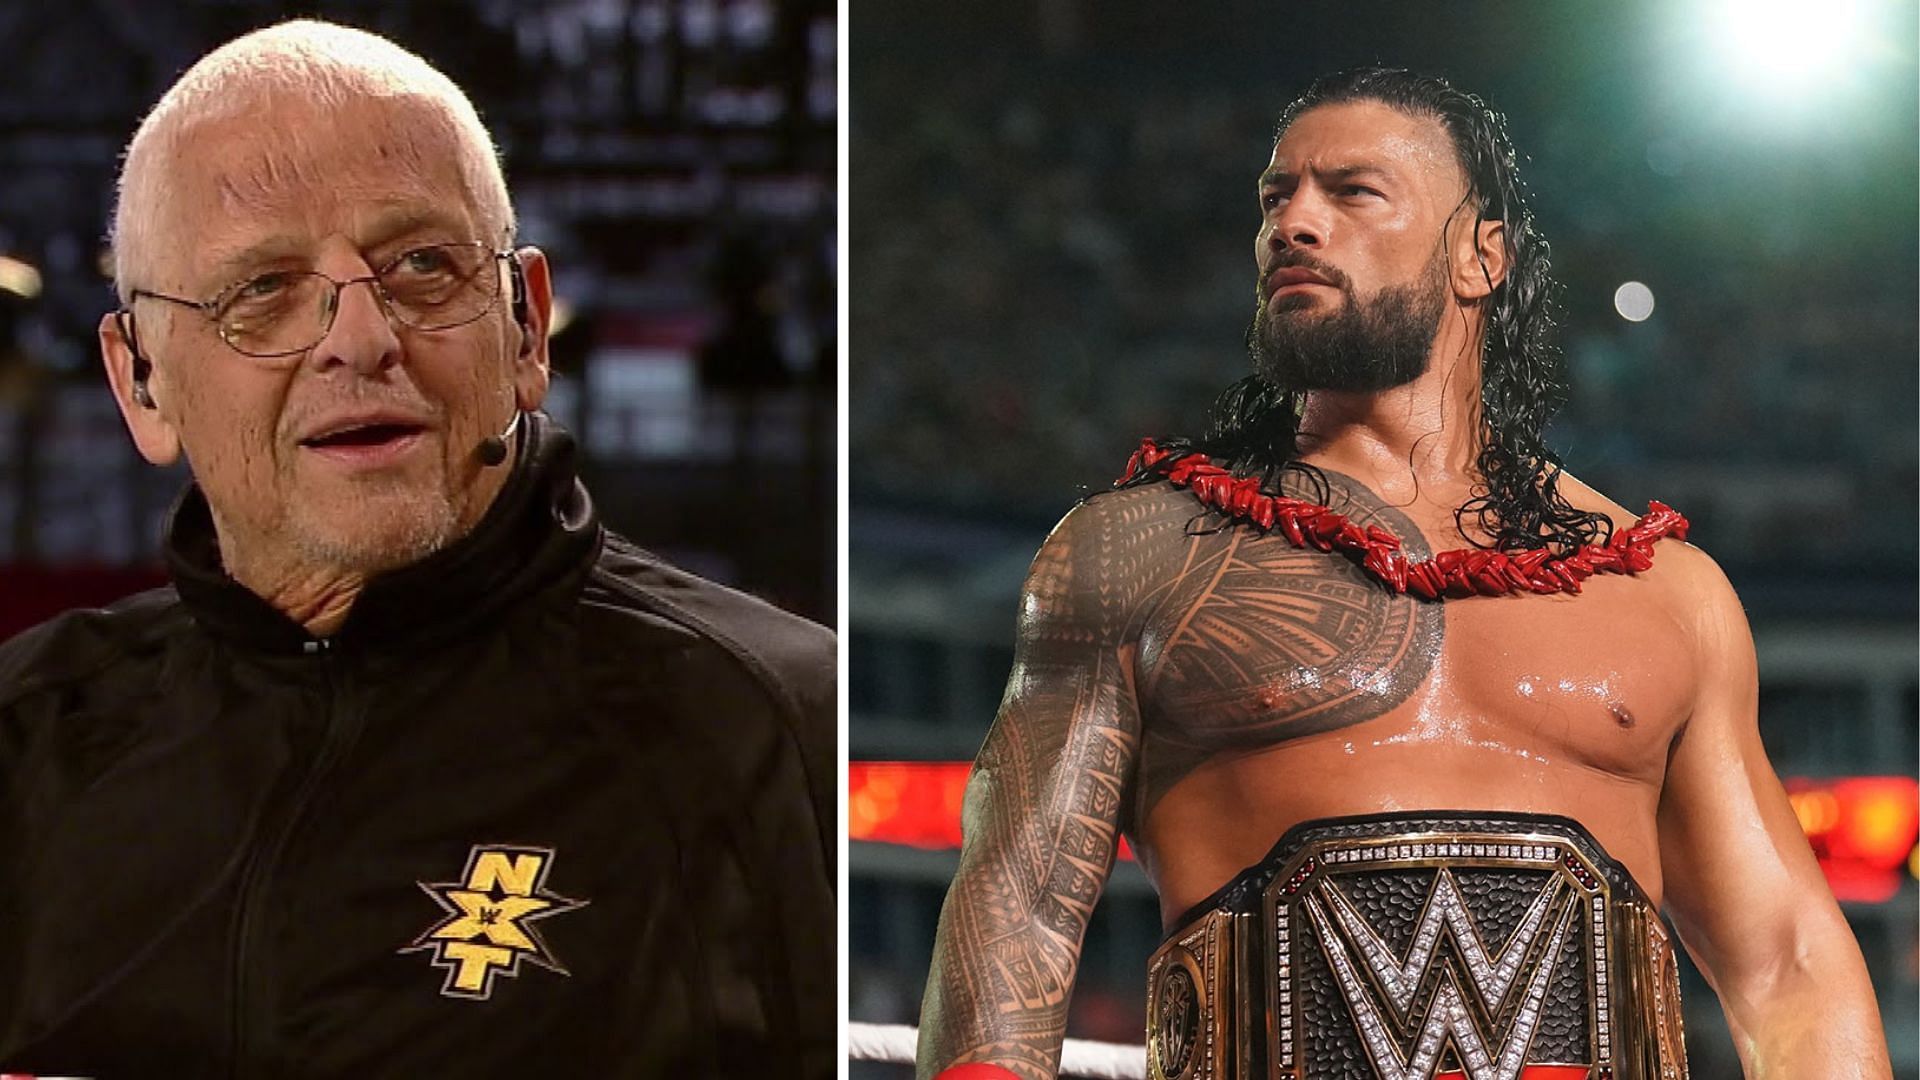 Roman Reigns was mentored by the legendary Dusty Rhodes